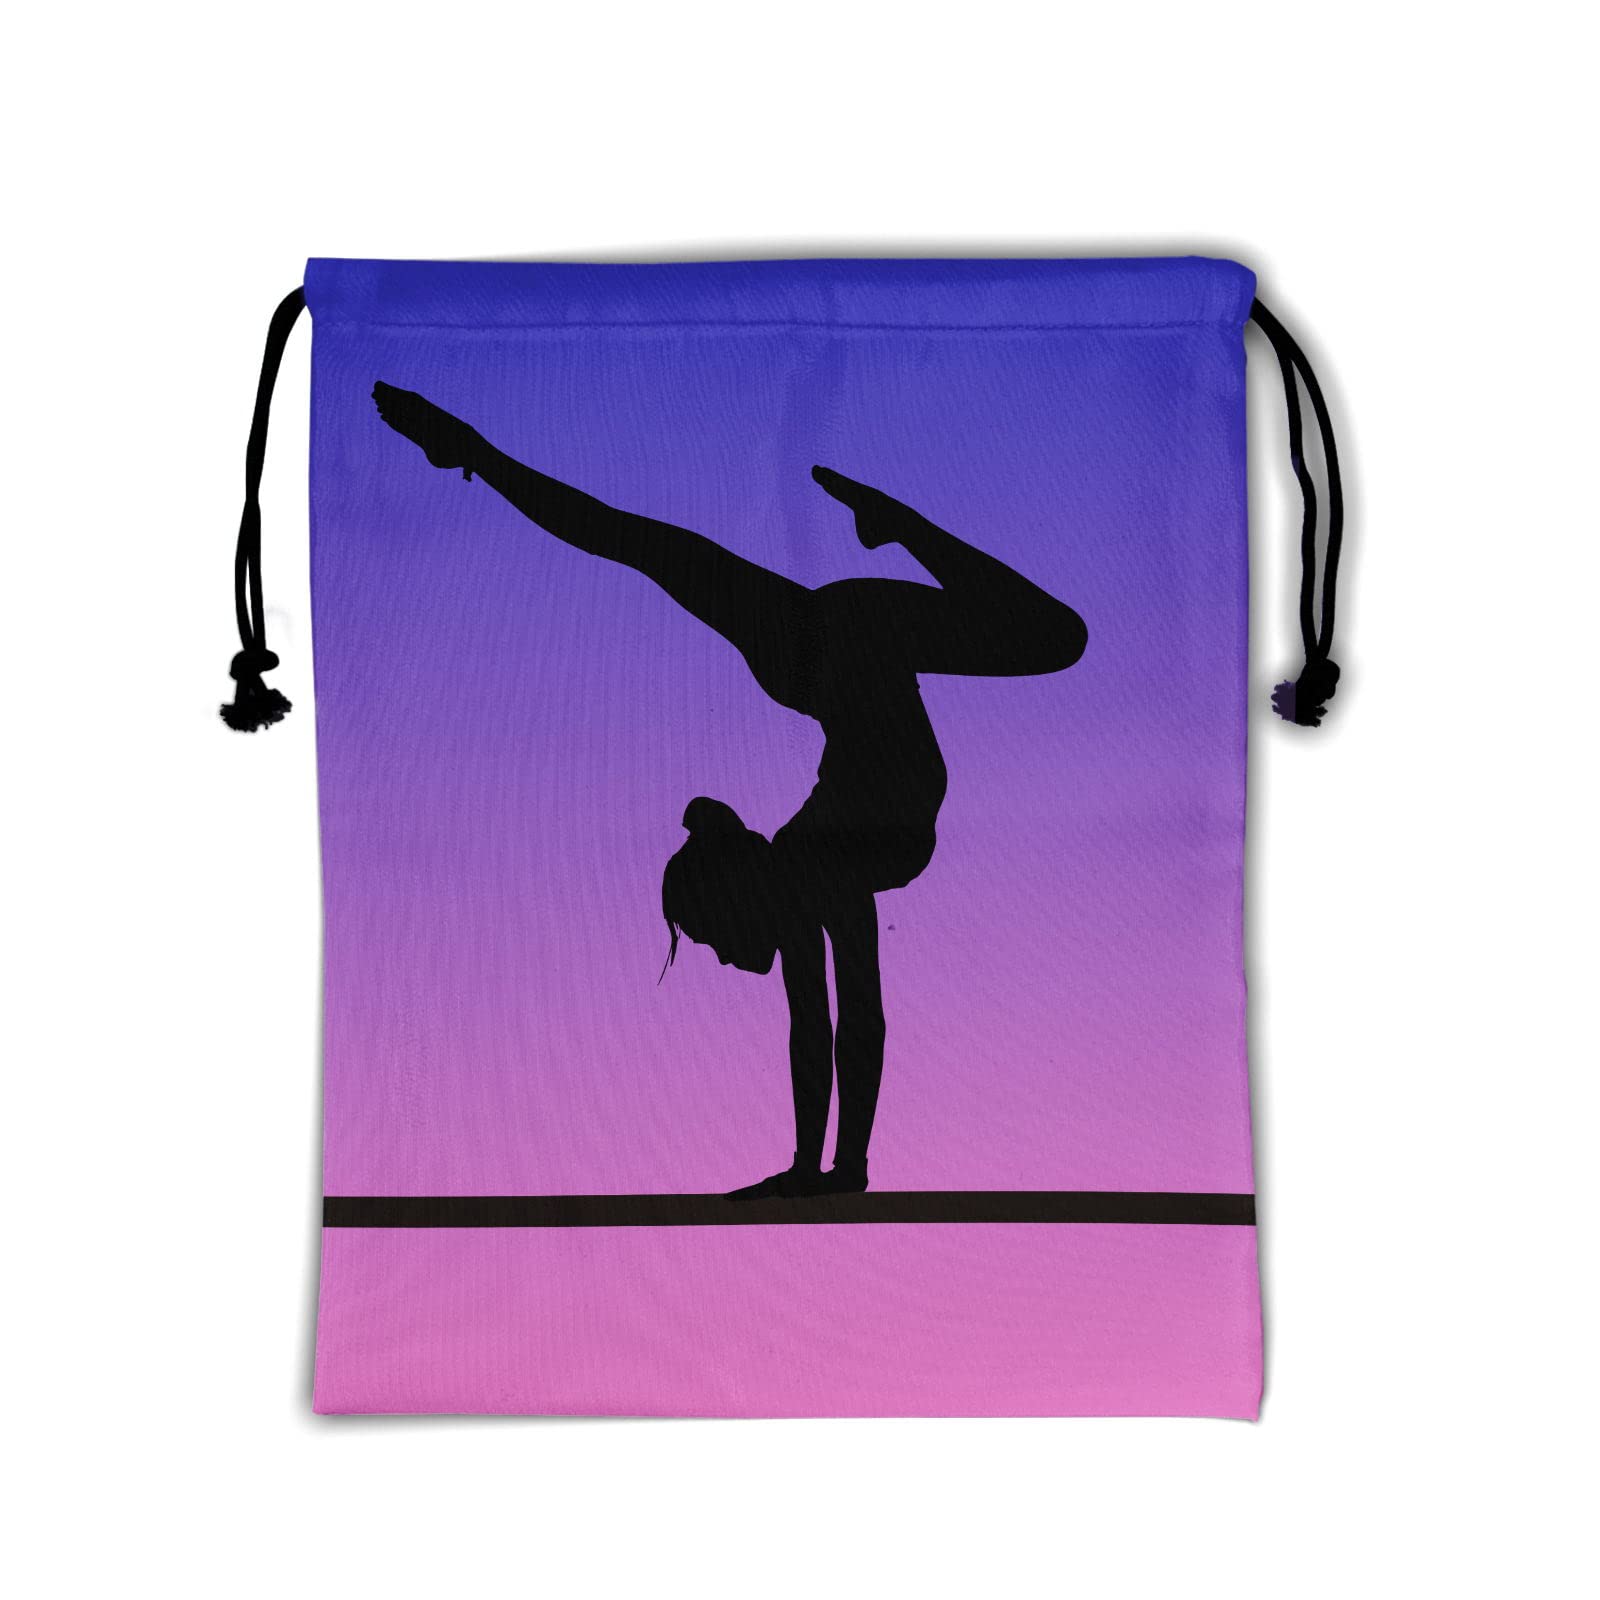  Colorful Flowers Gymnastics Grip Bag - Floral Drawstring Grip  Bags Plant Art Pouch Bag Botanical Athlete String Bag for Grips Towel :  Clothing, Shoes & Jewelry